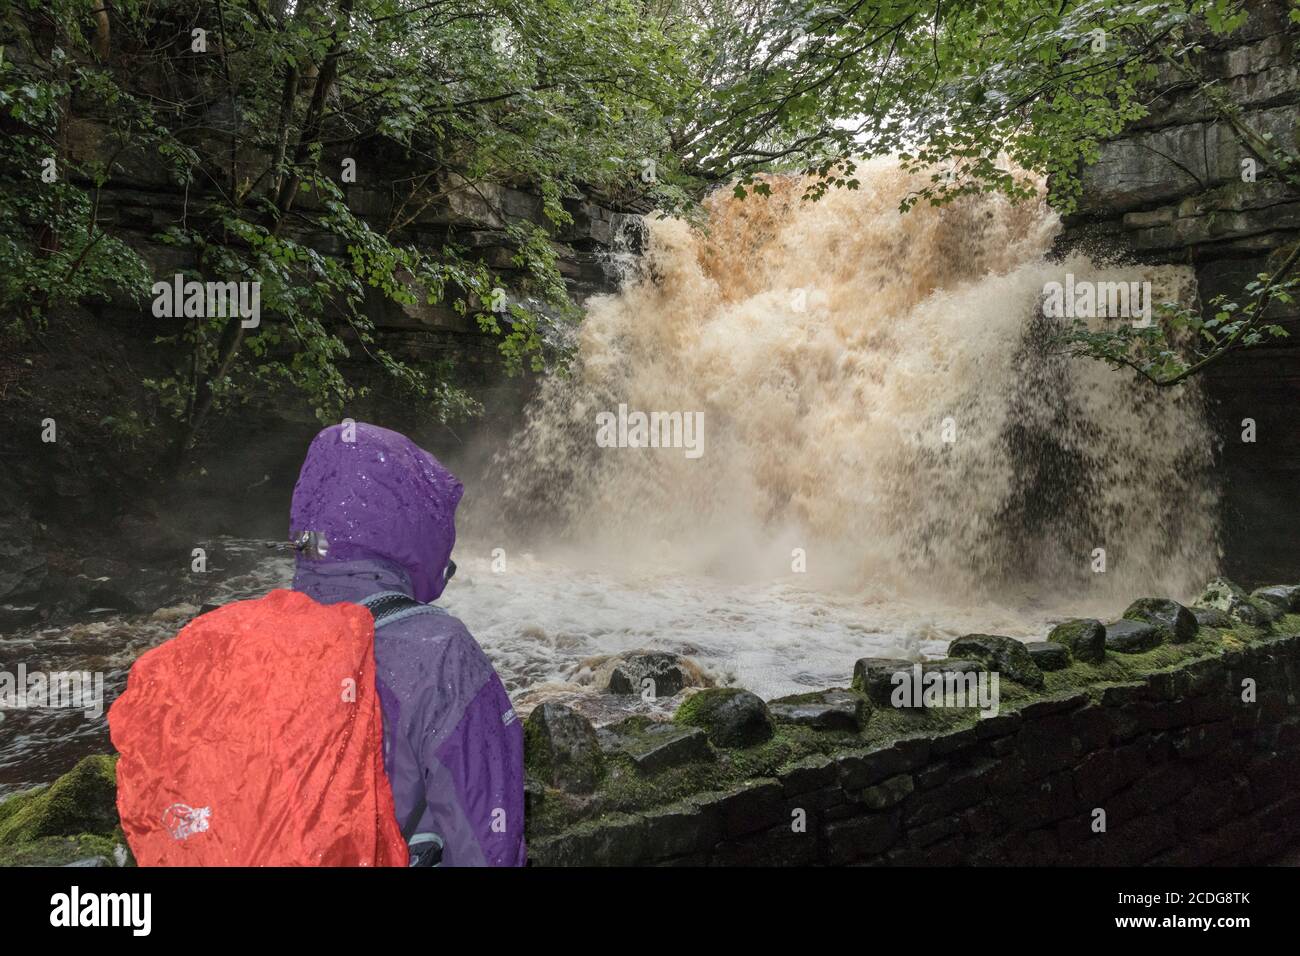 Teesdale, County Durham, UK.  28th August 2020. UK Weather.  Floodwater thunders over Summerhill Force waterfall after heavy overnight rain caused river levels to rise in Teesdale, County Durham.  Credit: David Forster/Alamy Live News Stock Photo